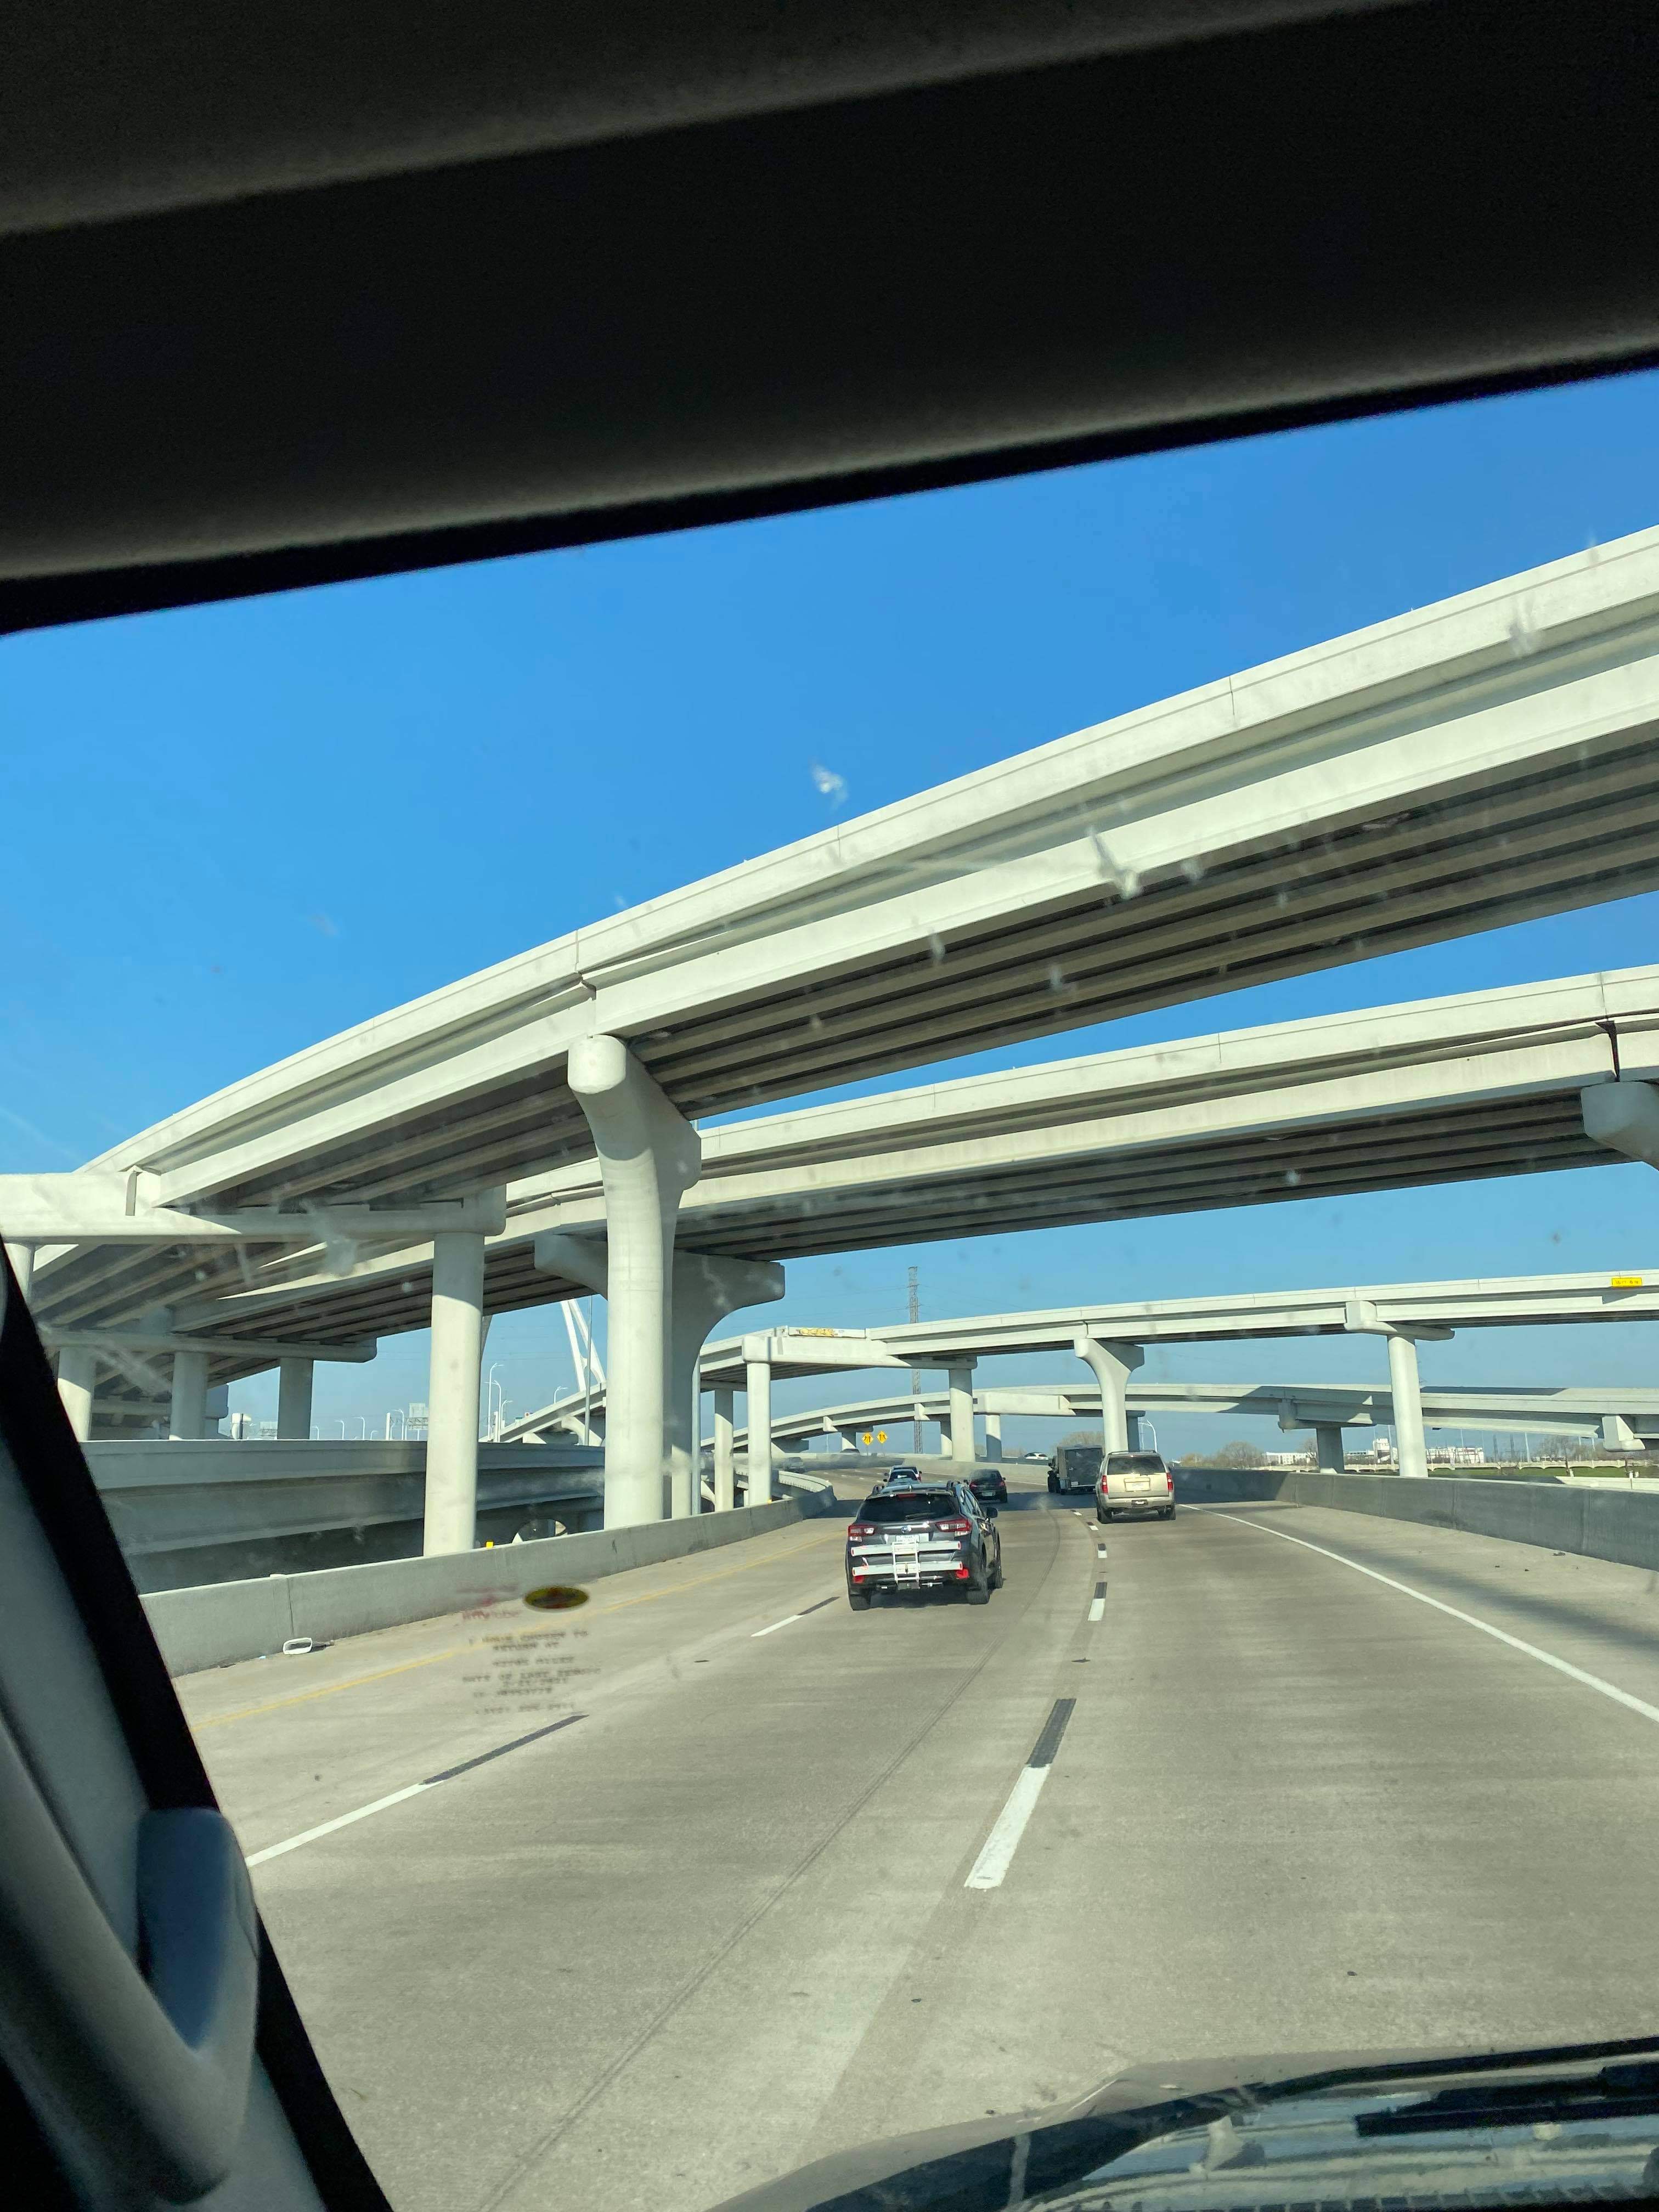 These are the highways in dallas... probably 2% of them fuck this city